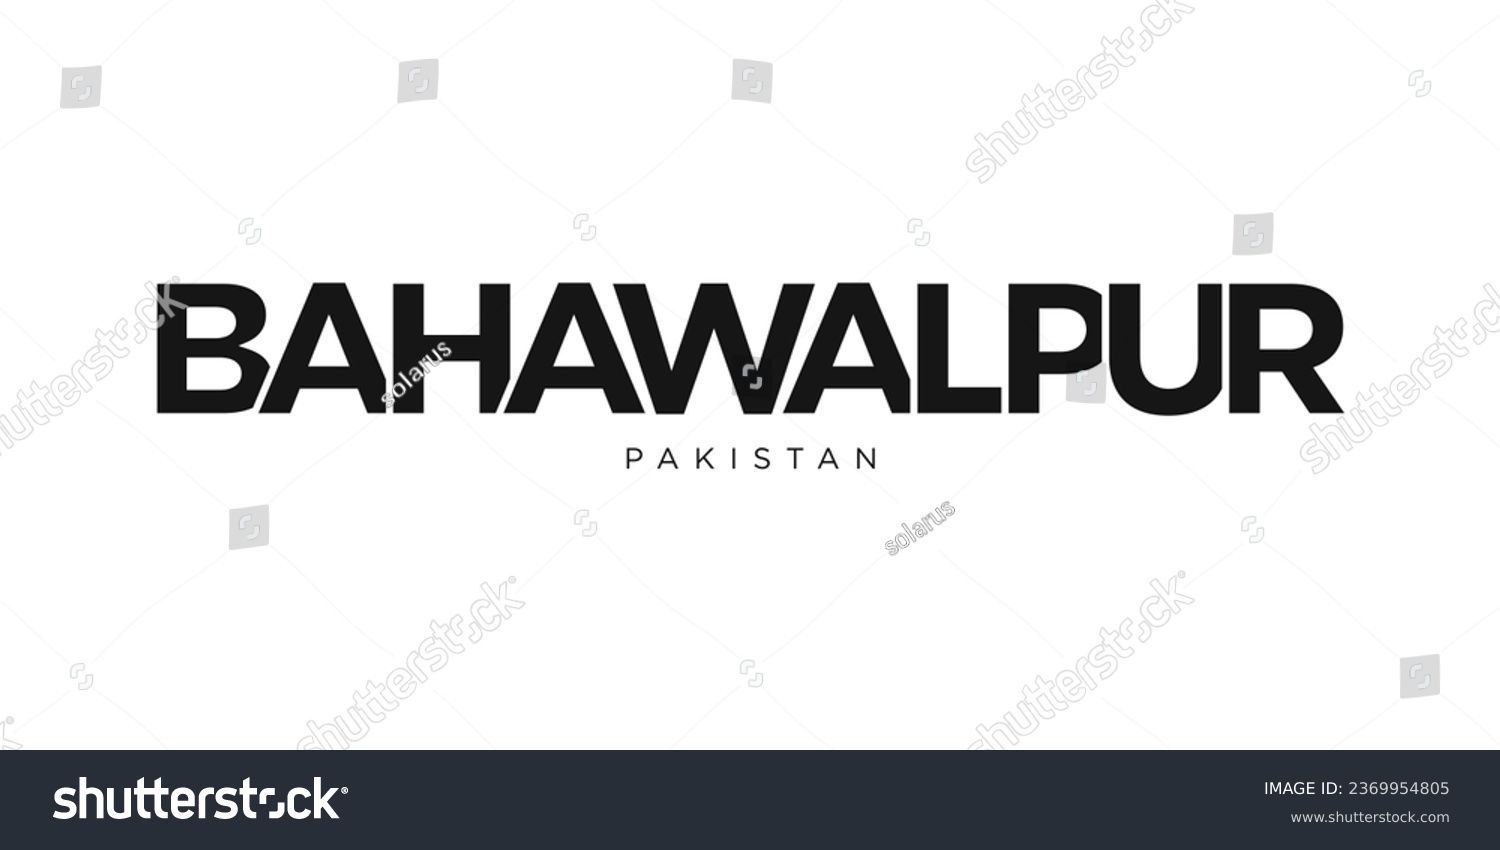 SVG of Bahawalpur in the Pakistan emblem for print and web. Design features geometric style, vector illustration with bold typography in modern font. Graphic slogan lettering isolated on white background. svg